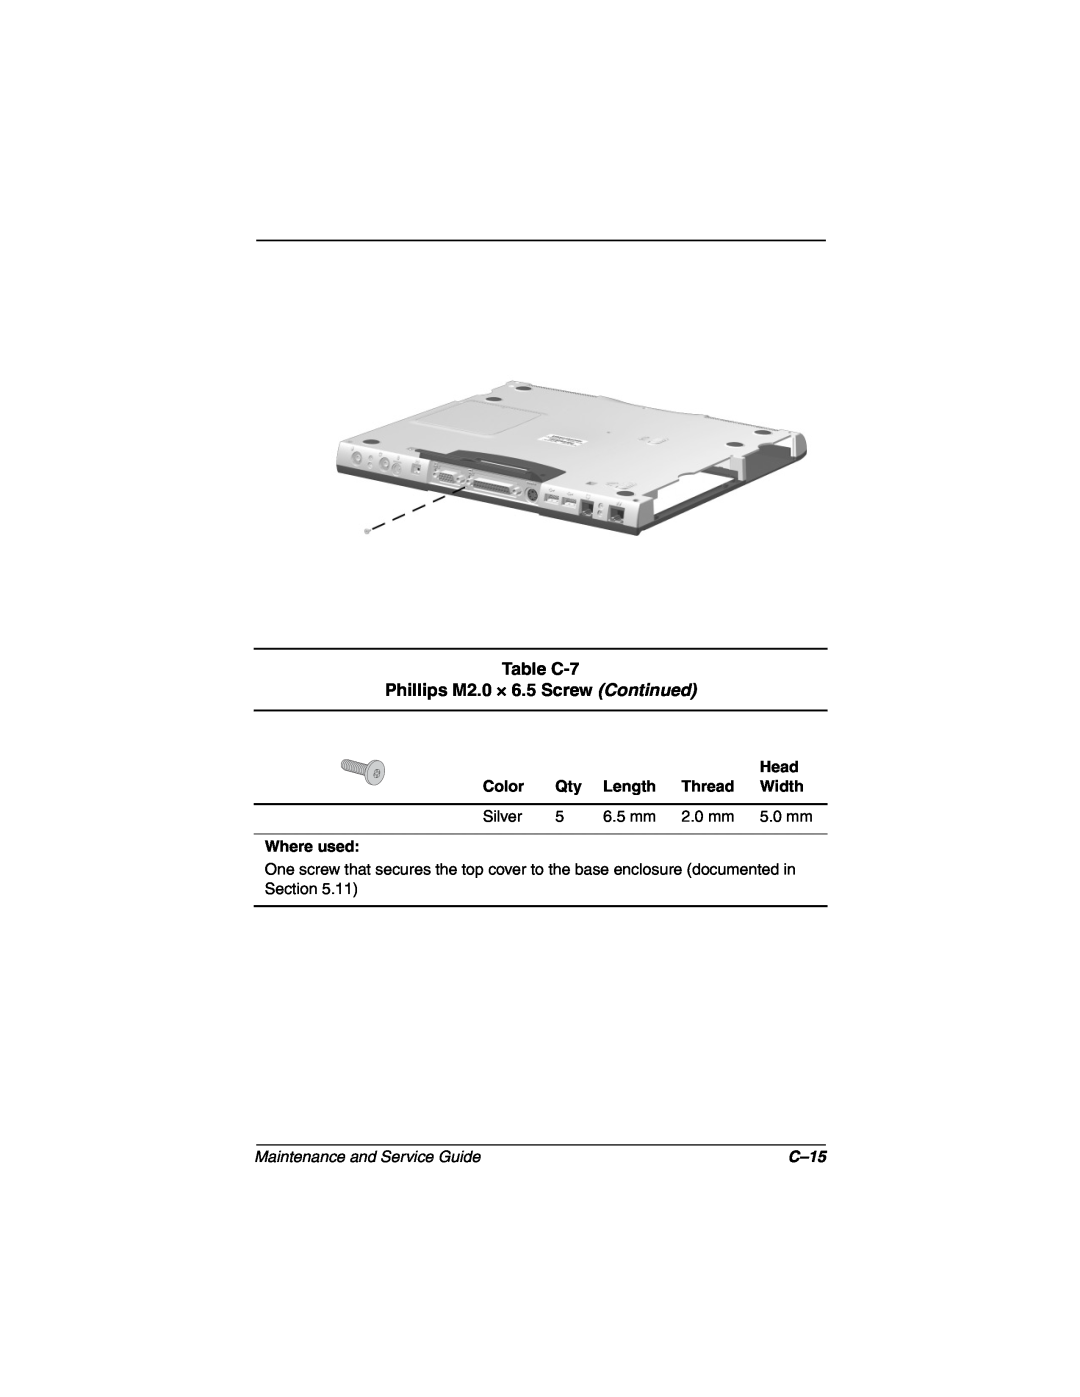 Compaq N160 manual Table C-7 Phillips M2.0 × 6.5 Screw Continued, Maintenance and Service Guide, C-15 